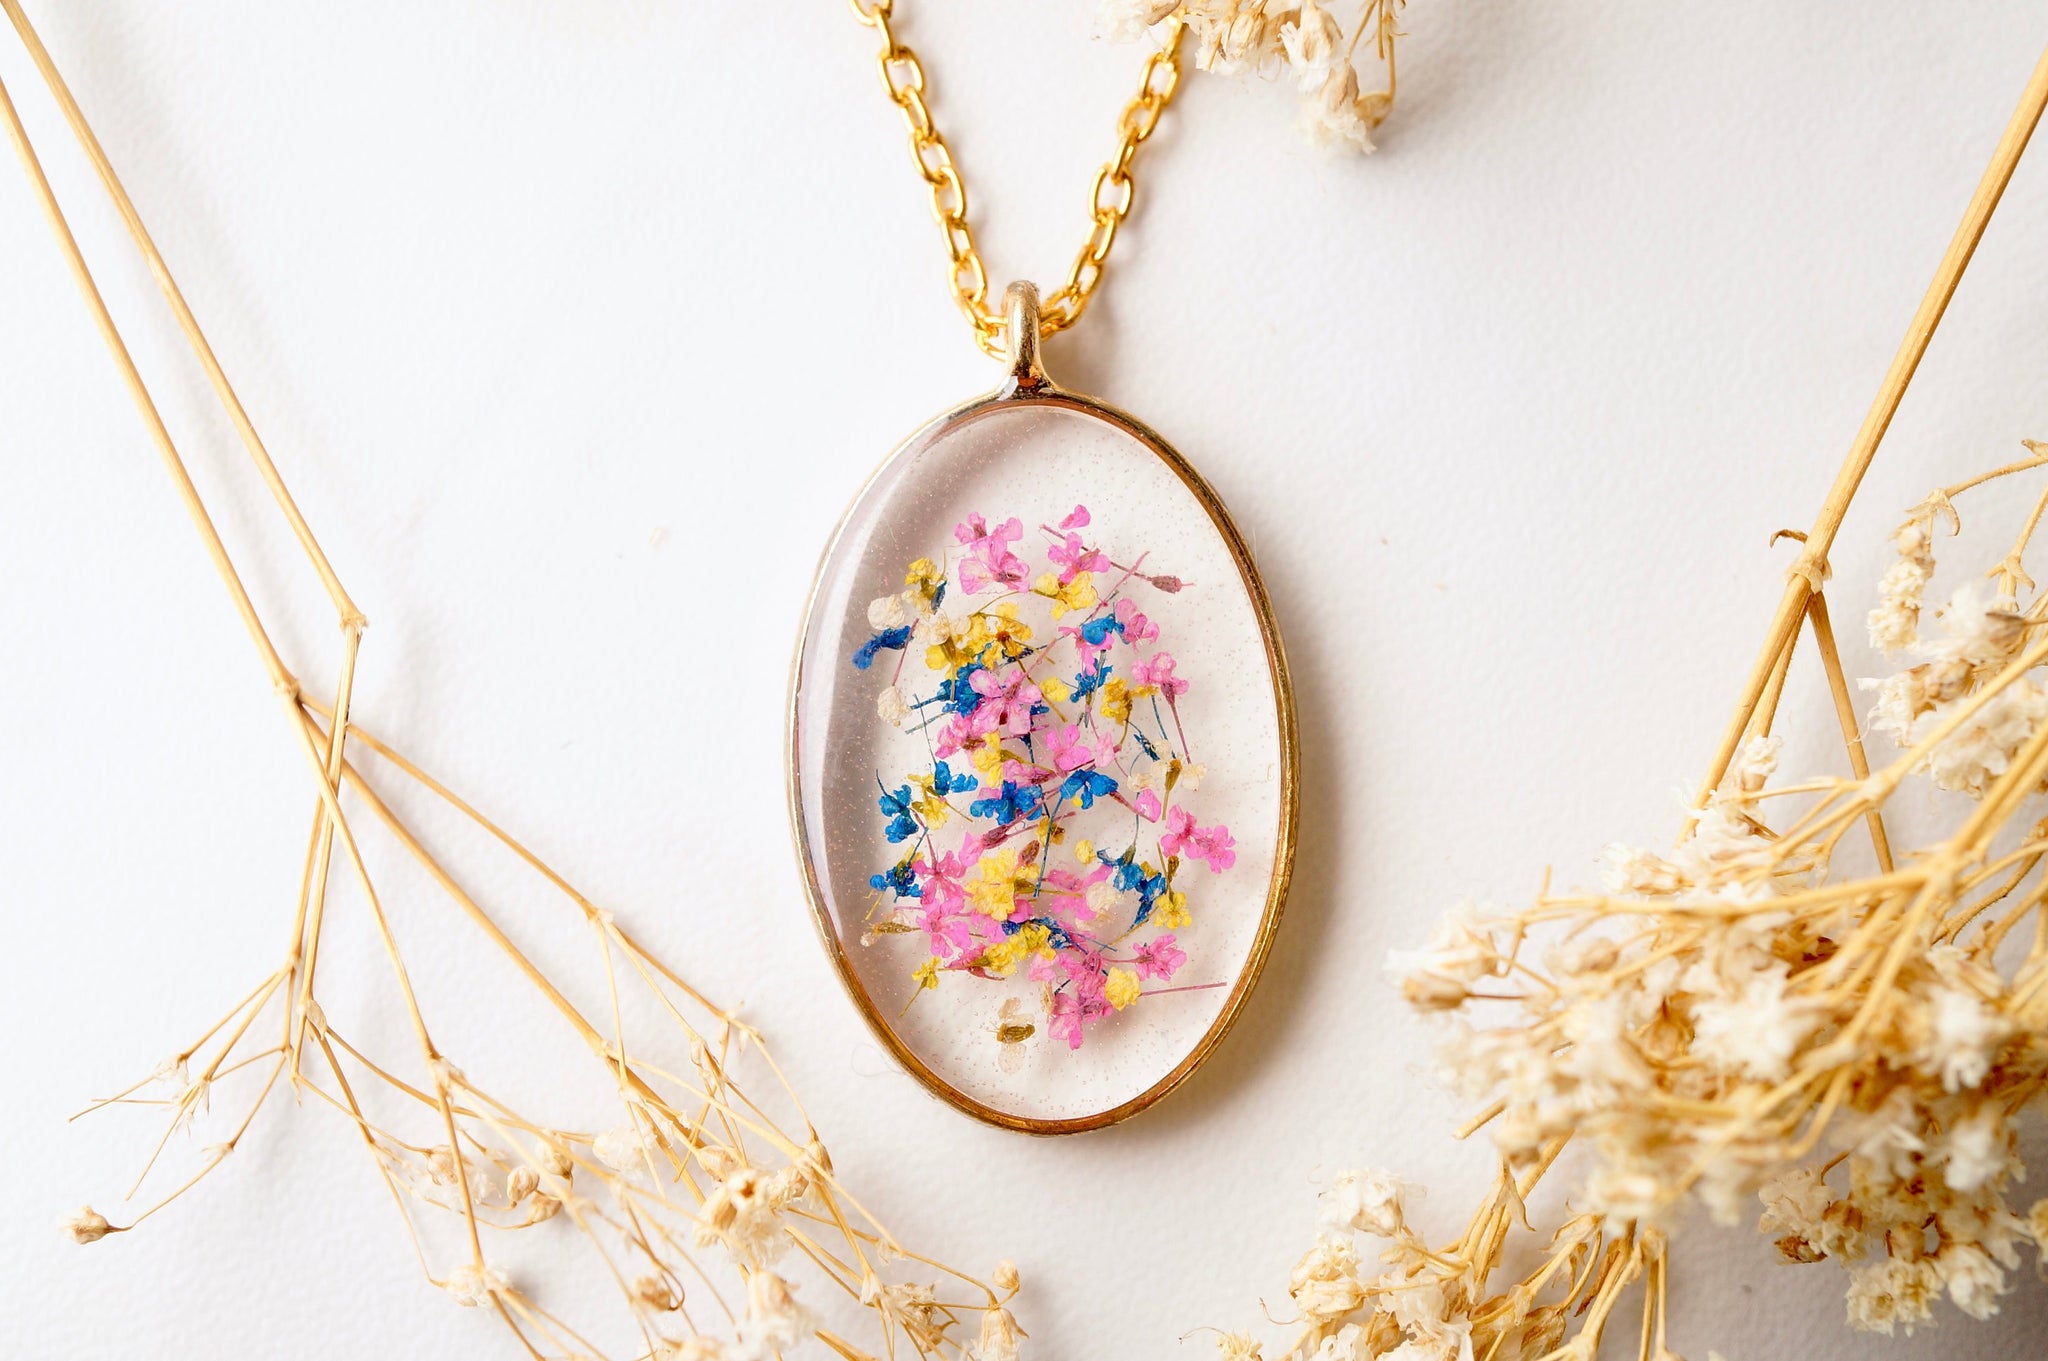 Real Pressed Flower and Resin Necklace Gold Oval in Pink Yellow Blue and White 24